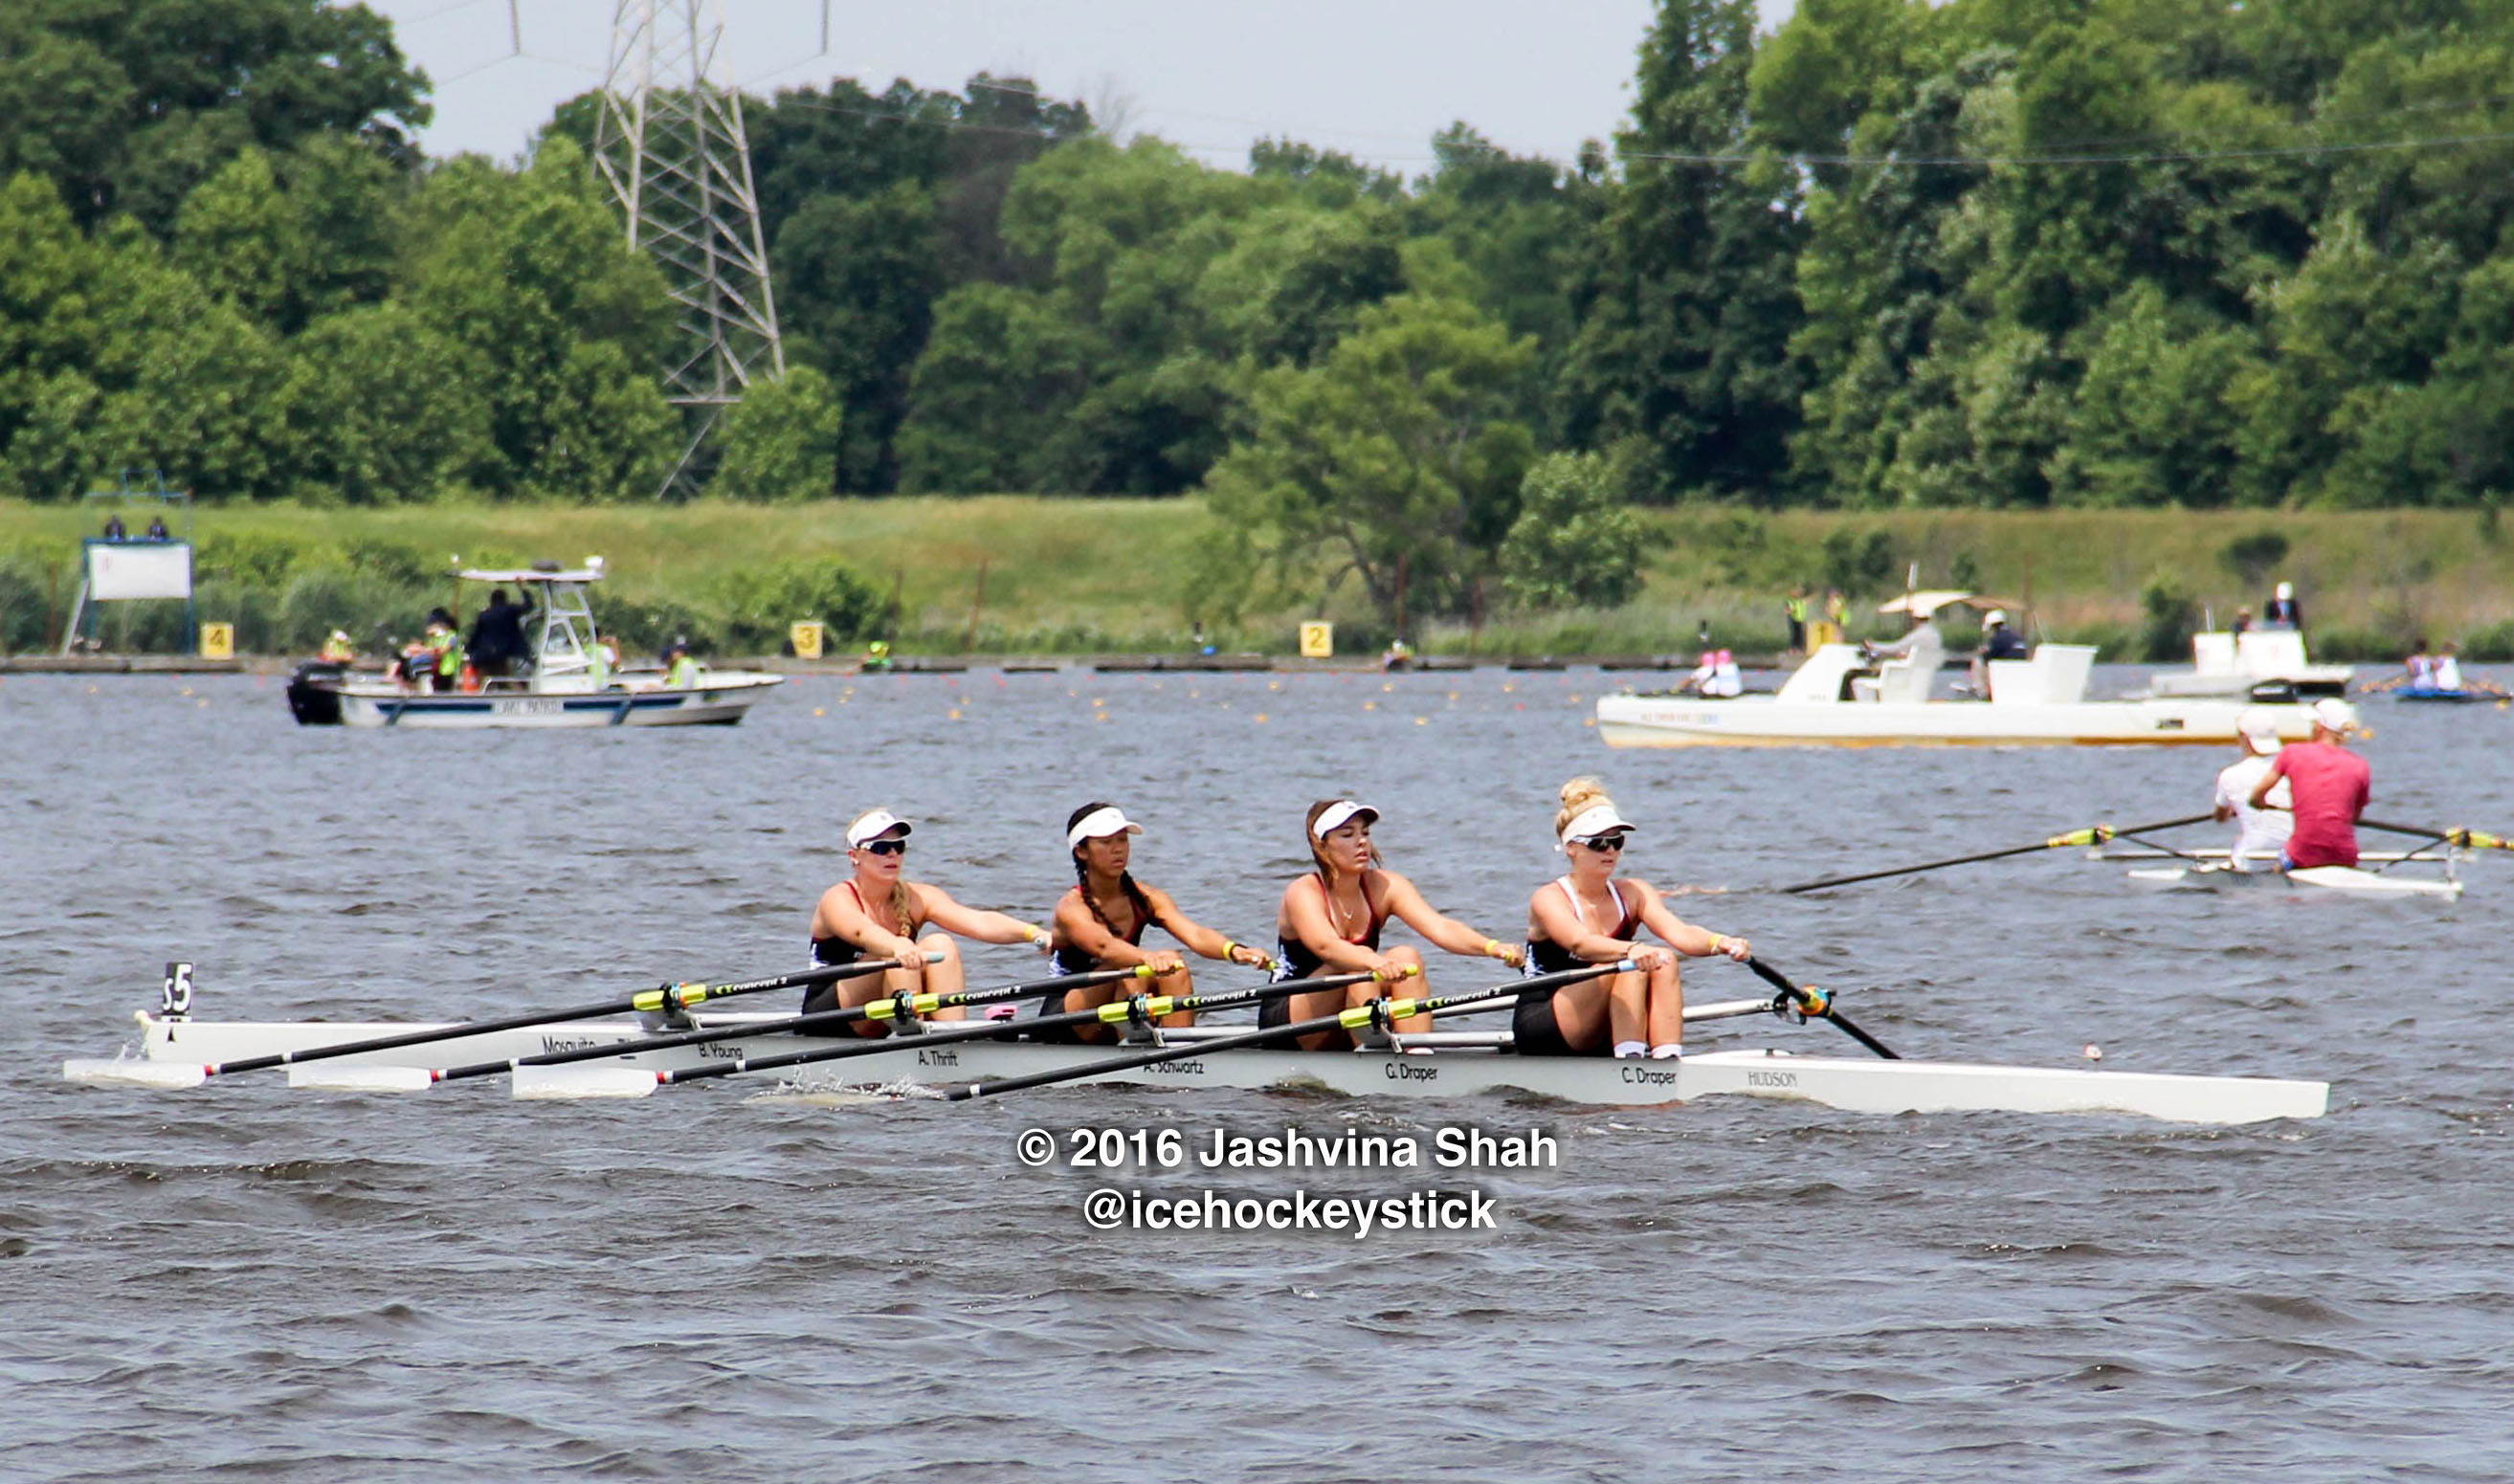 Perfecting the Quad Scull at the US Rowing Youth National Championships